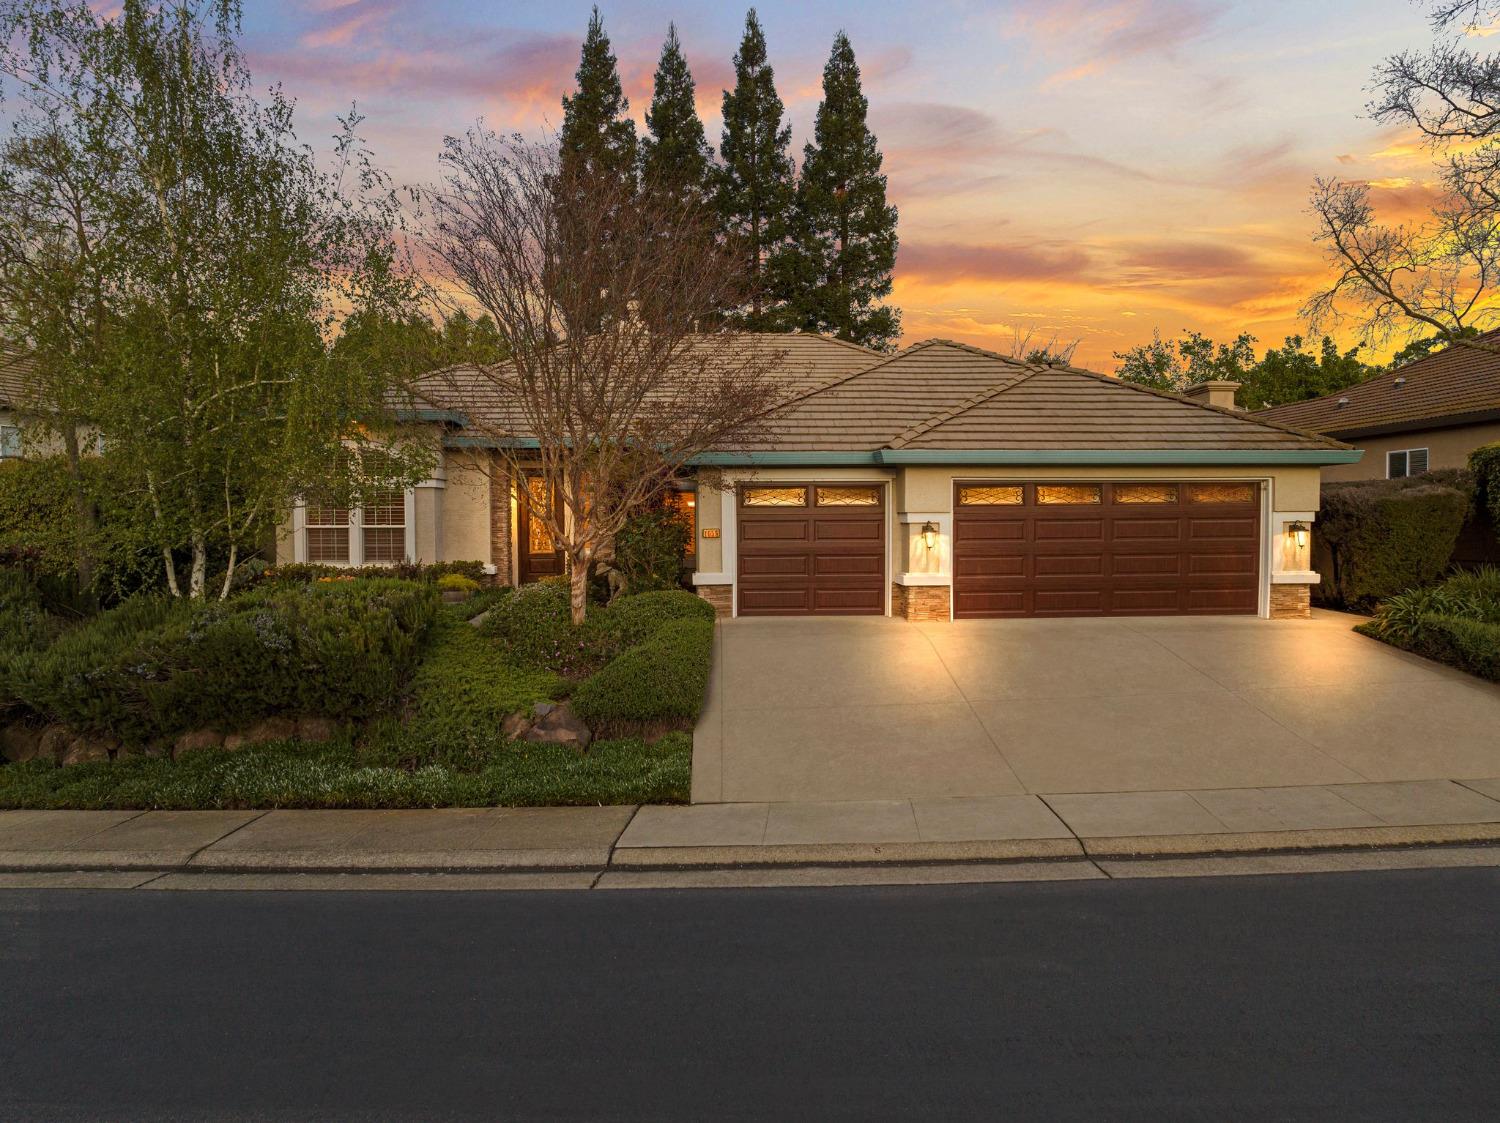 Photo of 1656 Krpan Dr in Roseville, CA